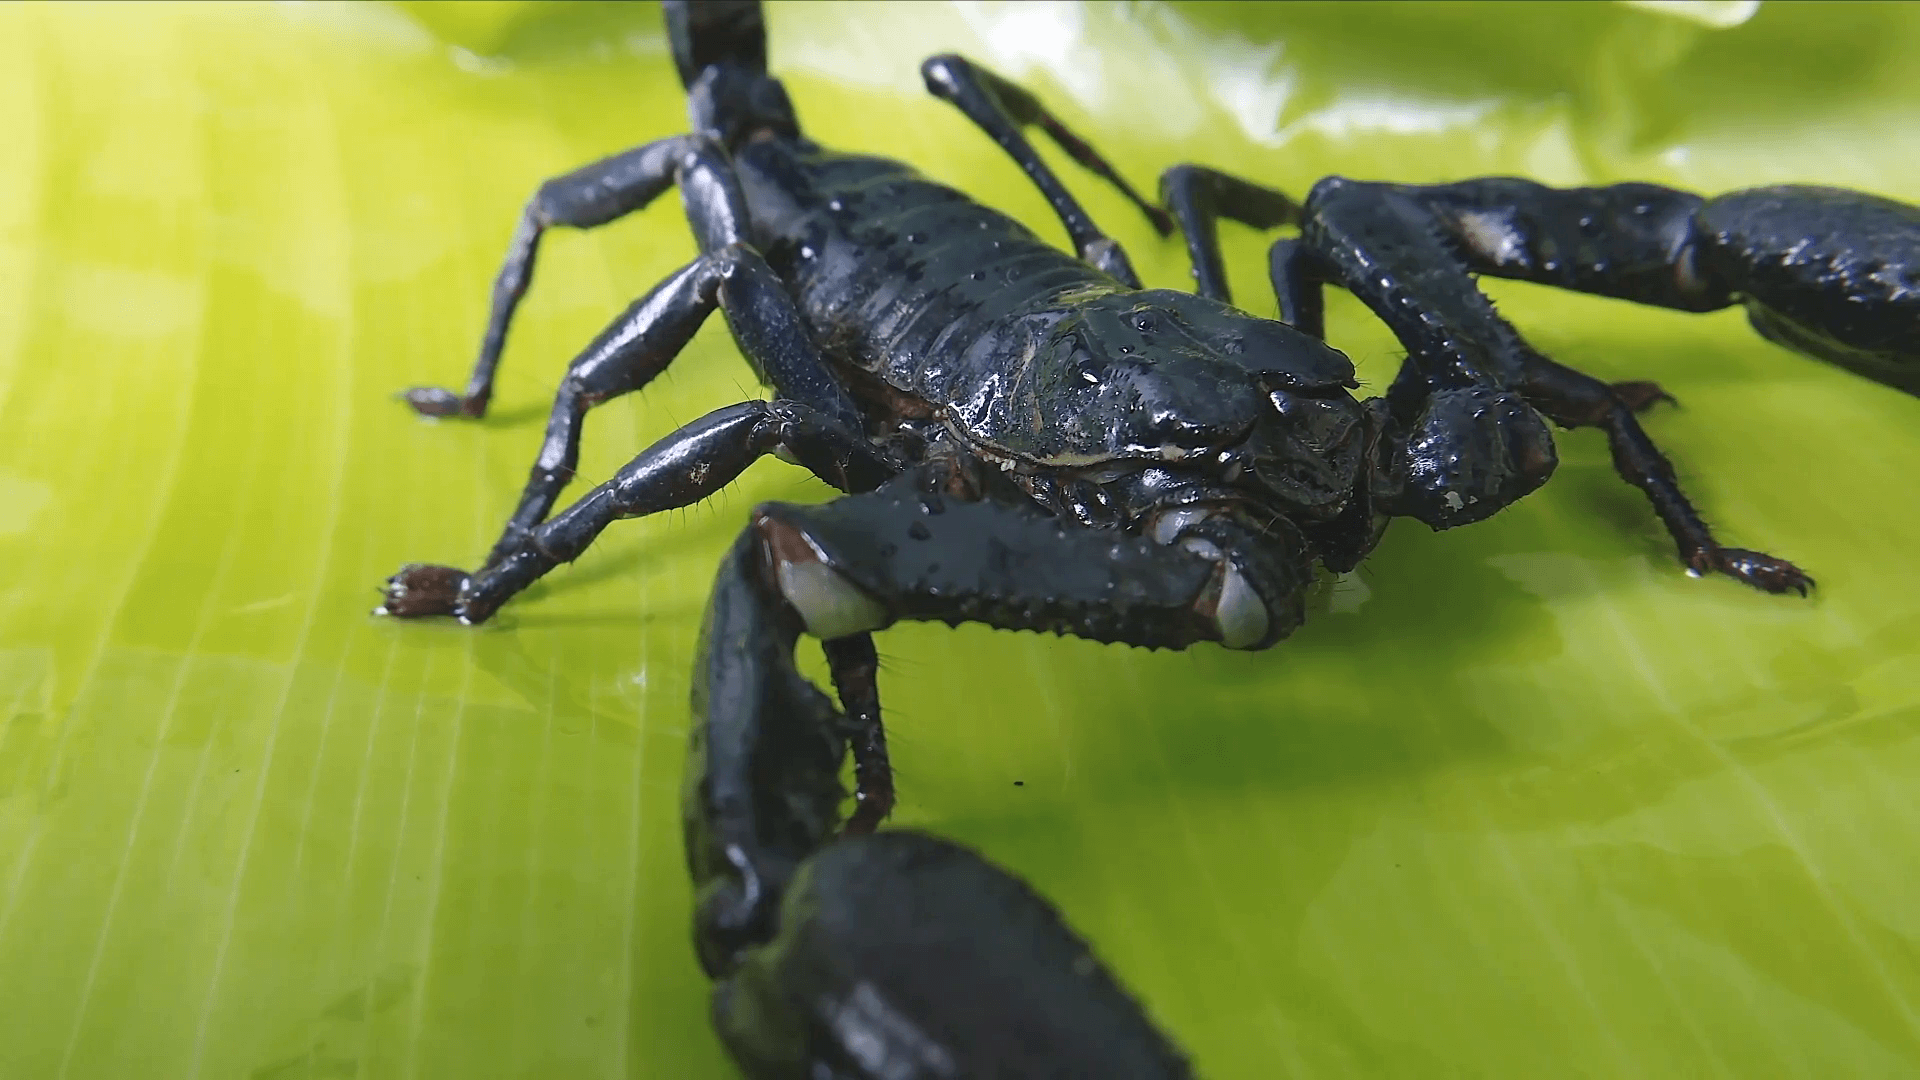 Creepy and scary black scorpion with deadly stinger and big claws